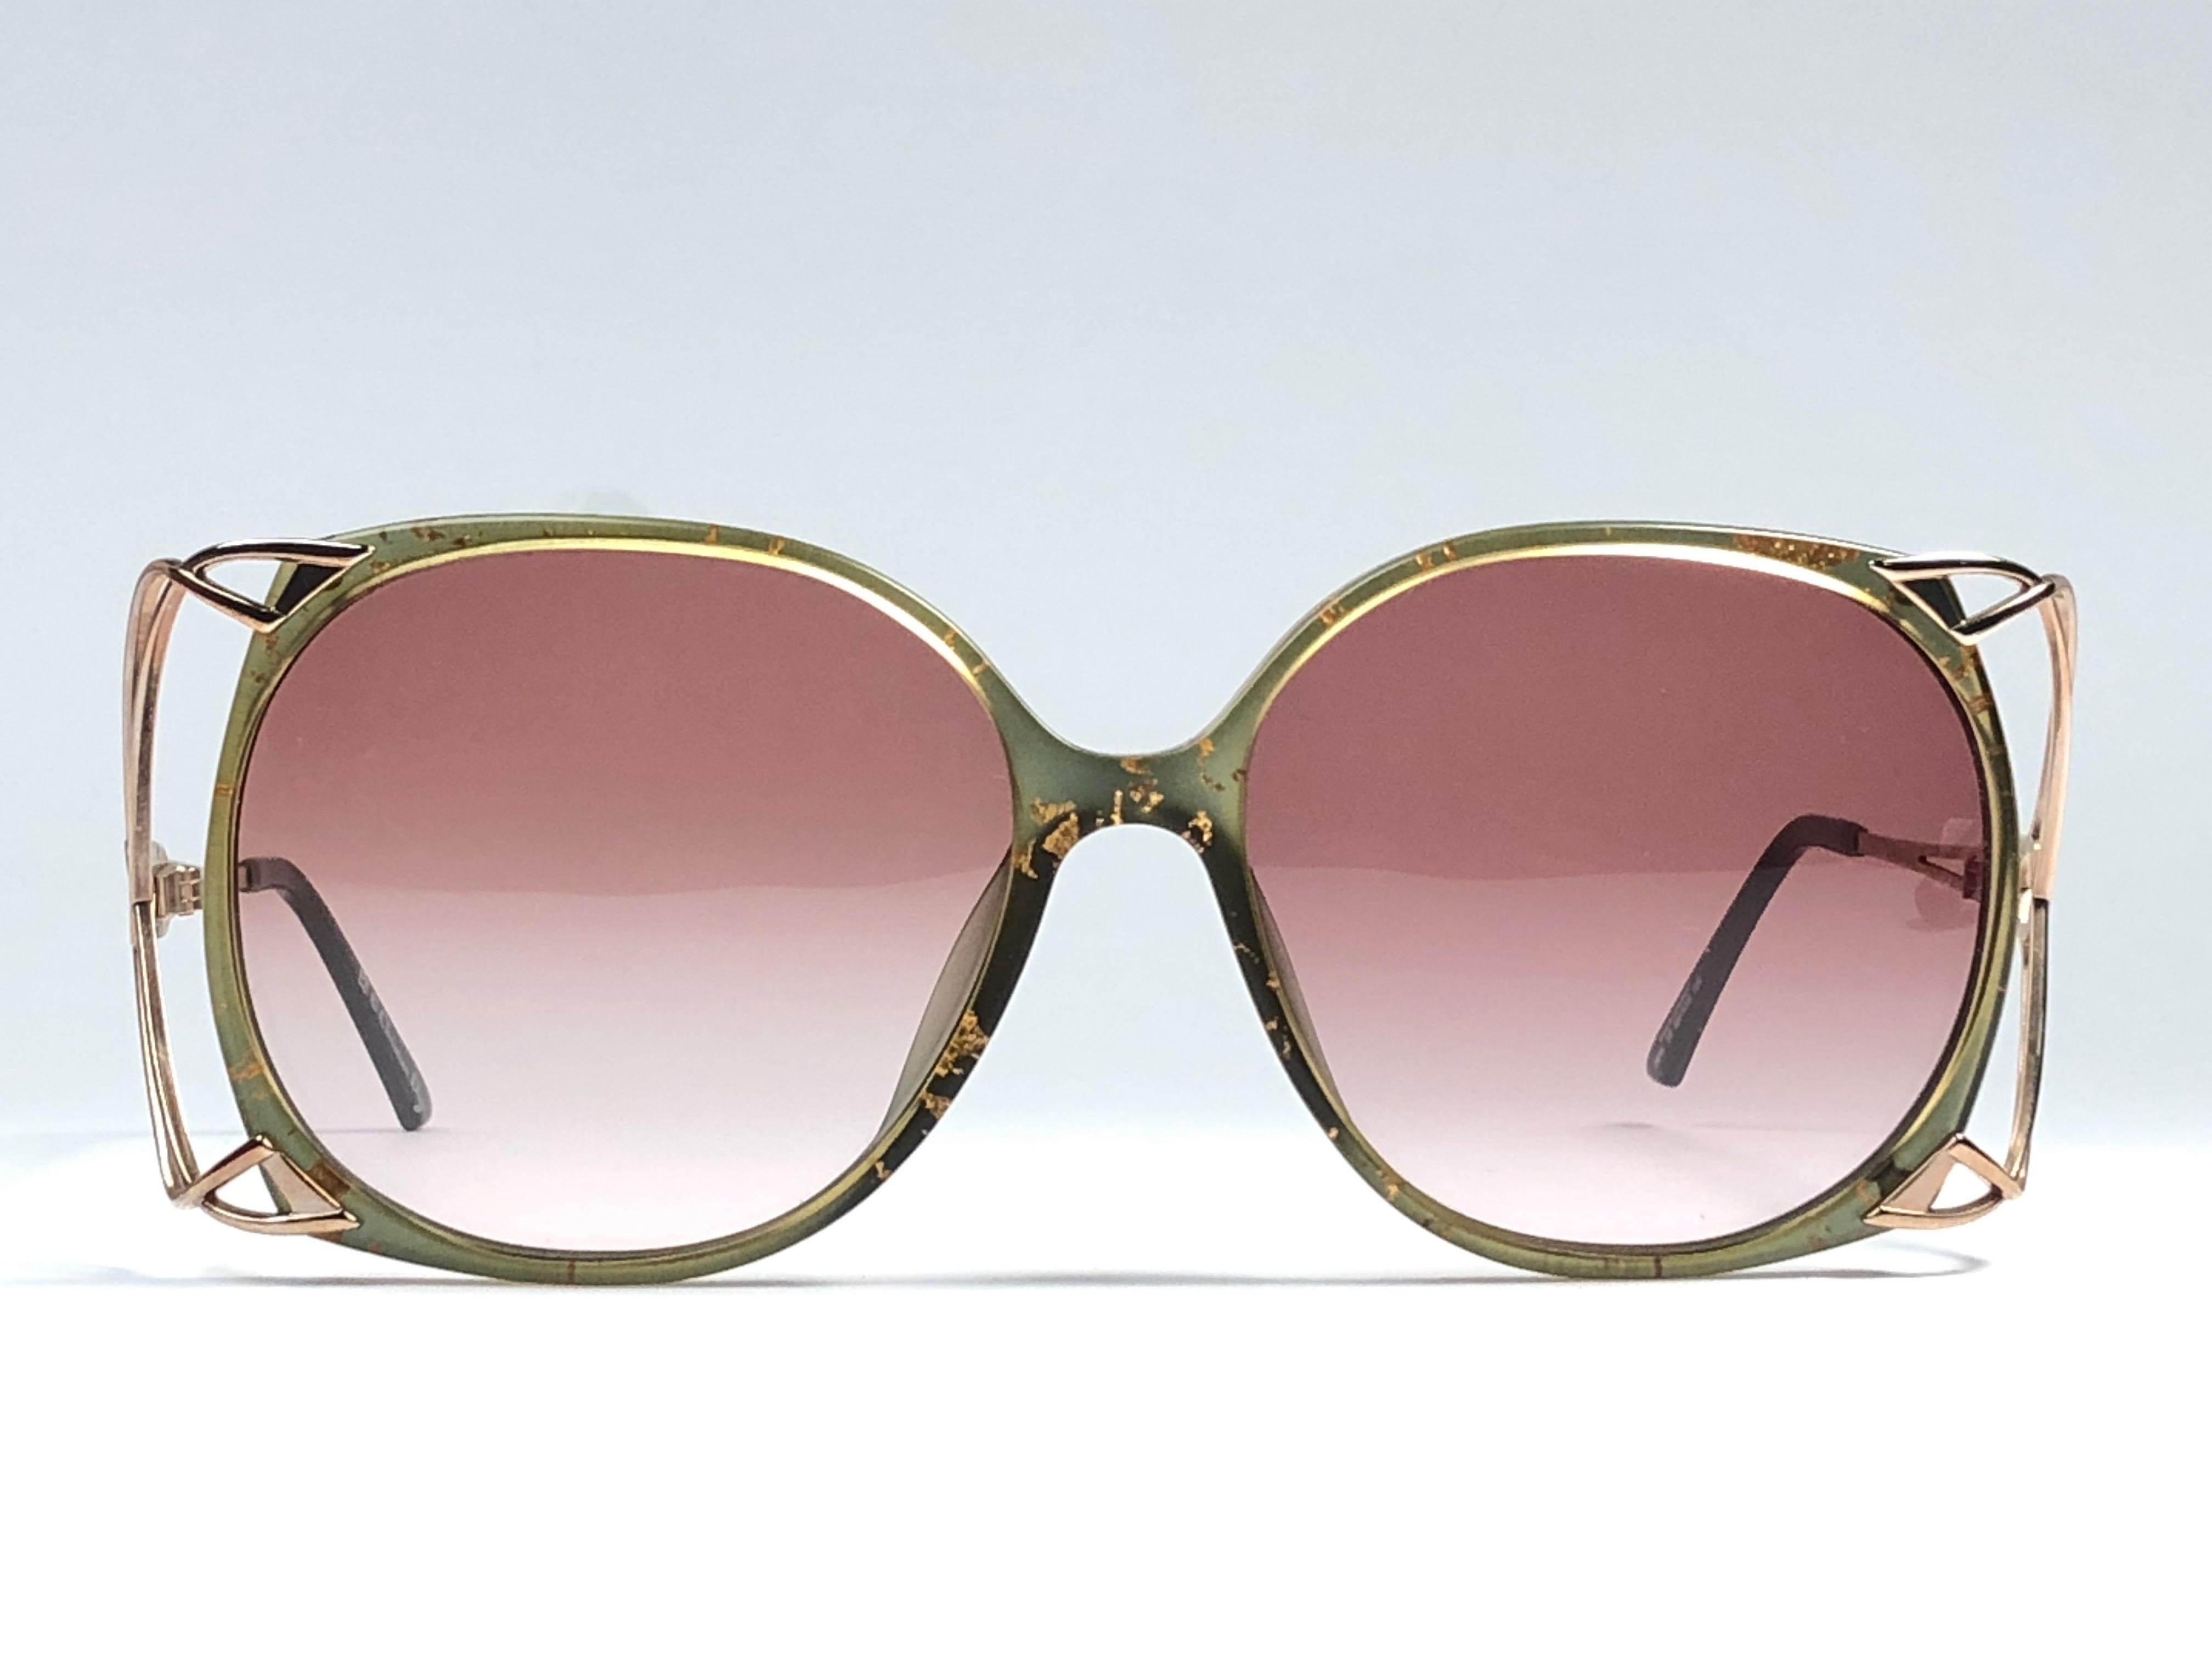 New Vintage Christian Dior 2610 Green frame with gold accented temples. Spotless light rose gradient lenses. 

Made in Germany.
 
Produced and design in 1970's.

New, never worn or displayed. This item may show minor sign of wear due to storage.